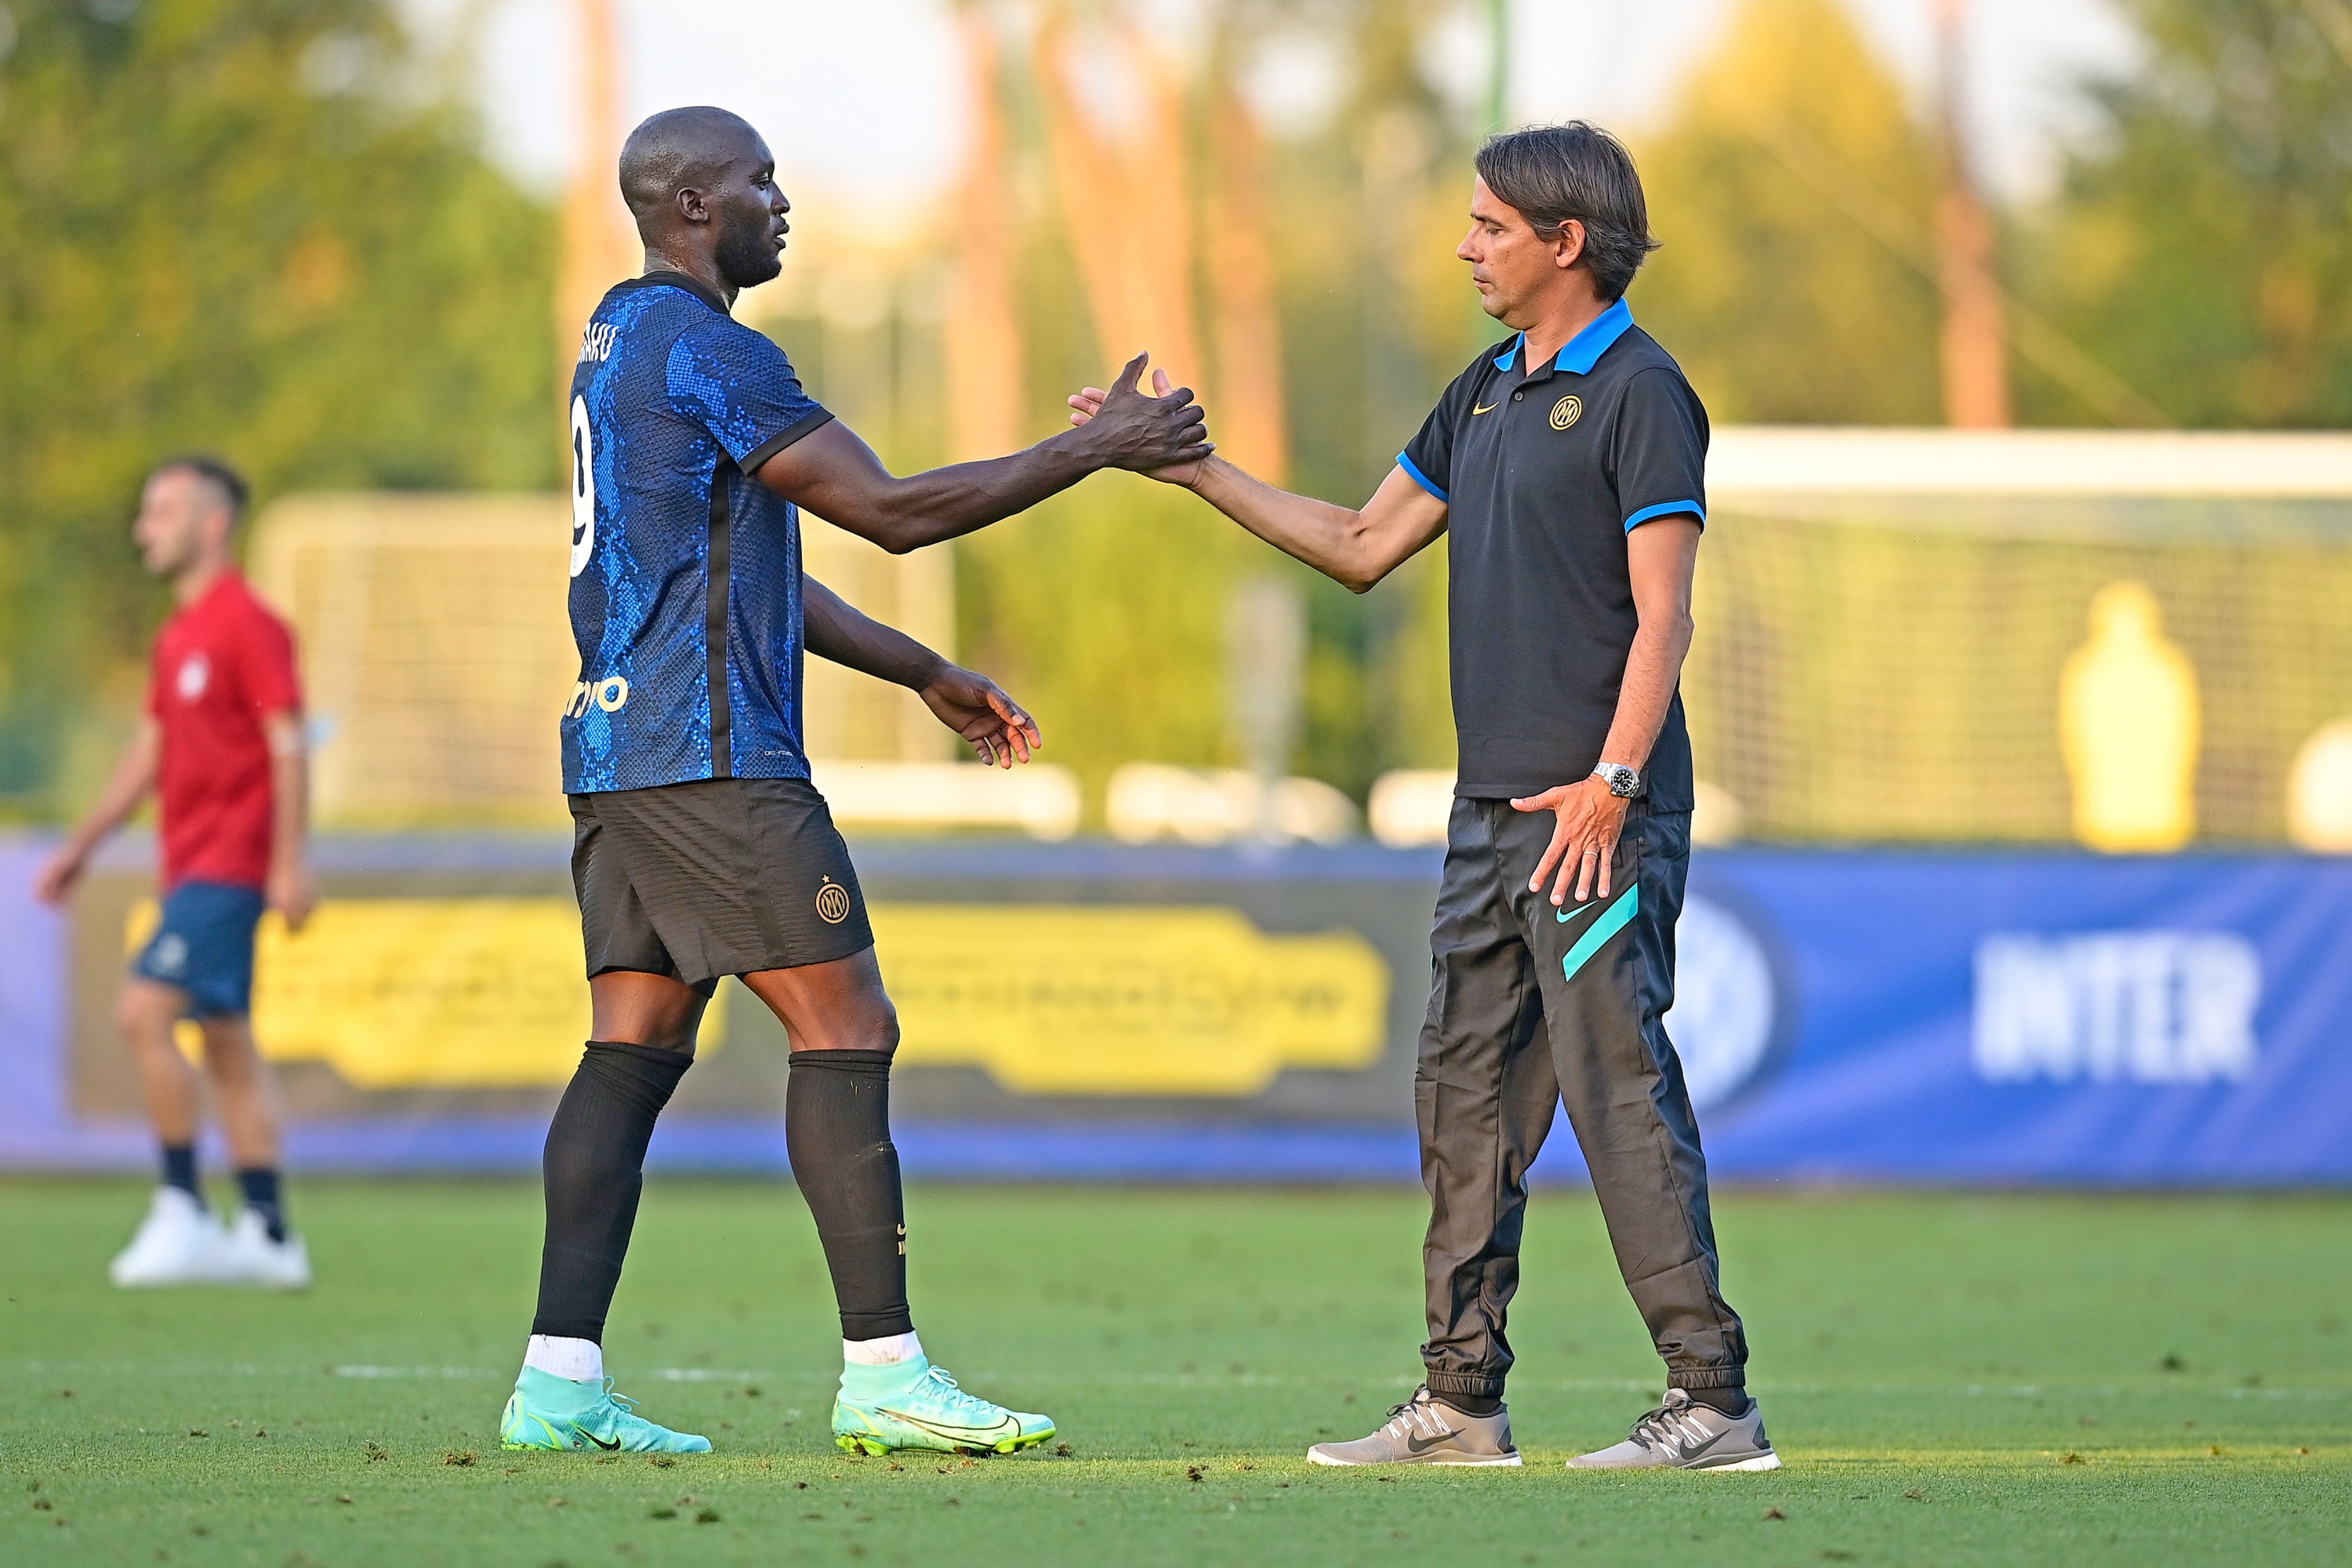 COMO, ITALY - JULY 28: Romelu Lukaku of FC Internazionale and Head Coach Simone Inzaghi of FC Internazionale during the pre-season friendly match between FC Internazionale and FC Crotone at the club's training ground Suning Training Center at Appiano Gentile on July 28, 2021 in Como, Italy. (Photo by Mattia Ozbot - Inter/Inter via Getty Images)